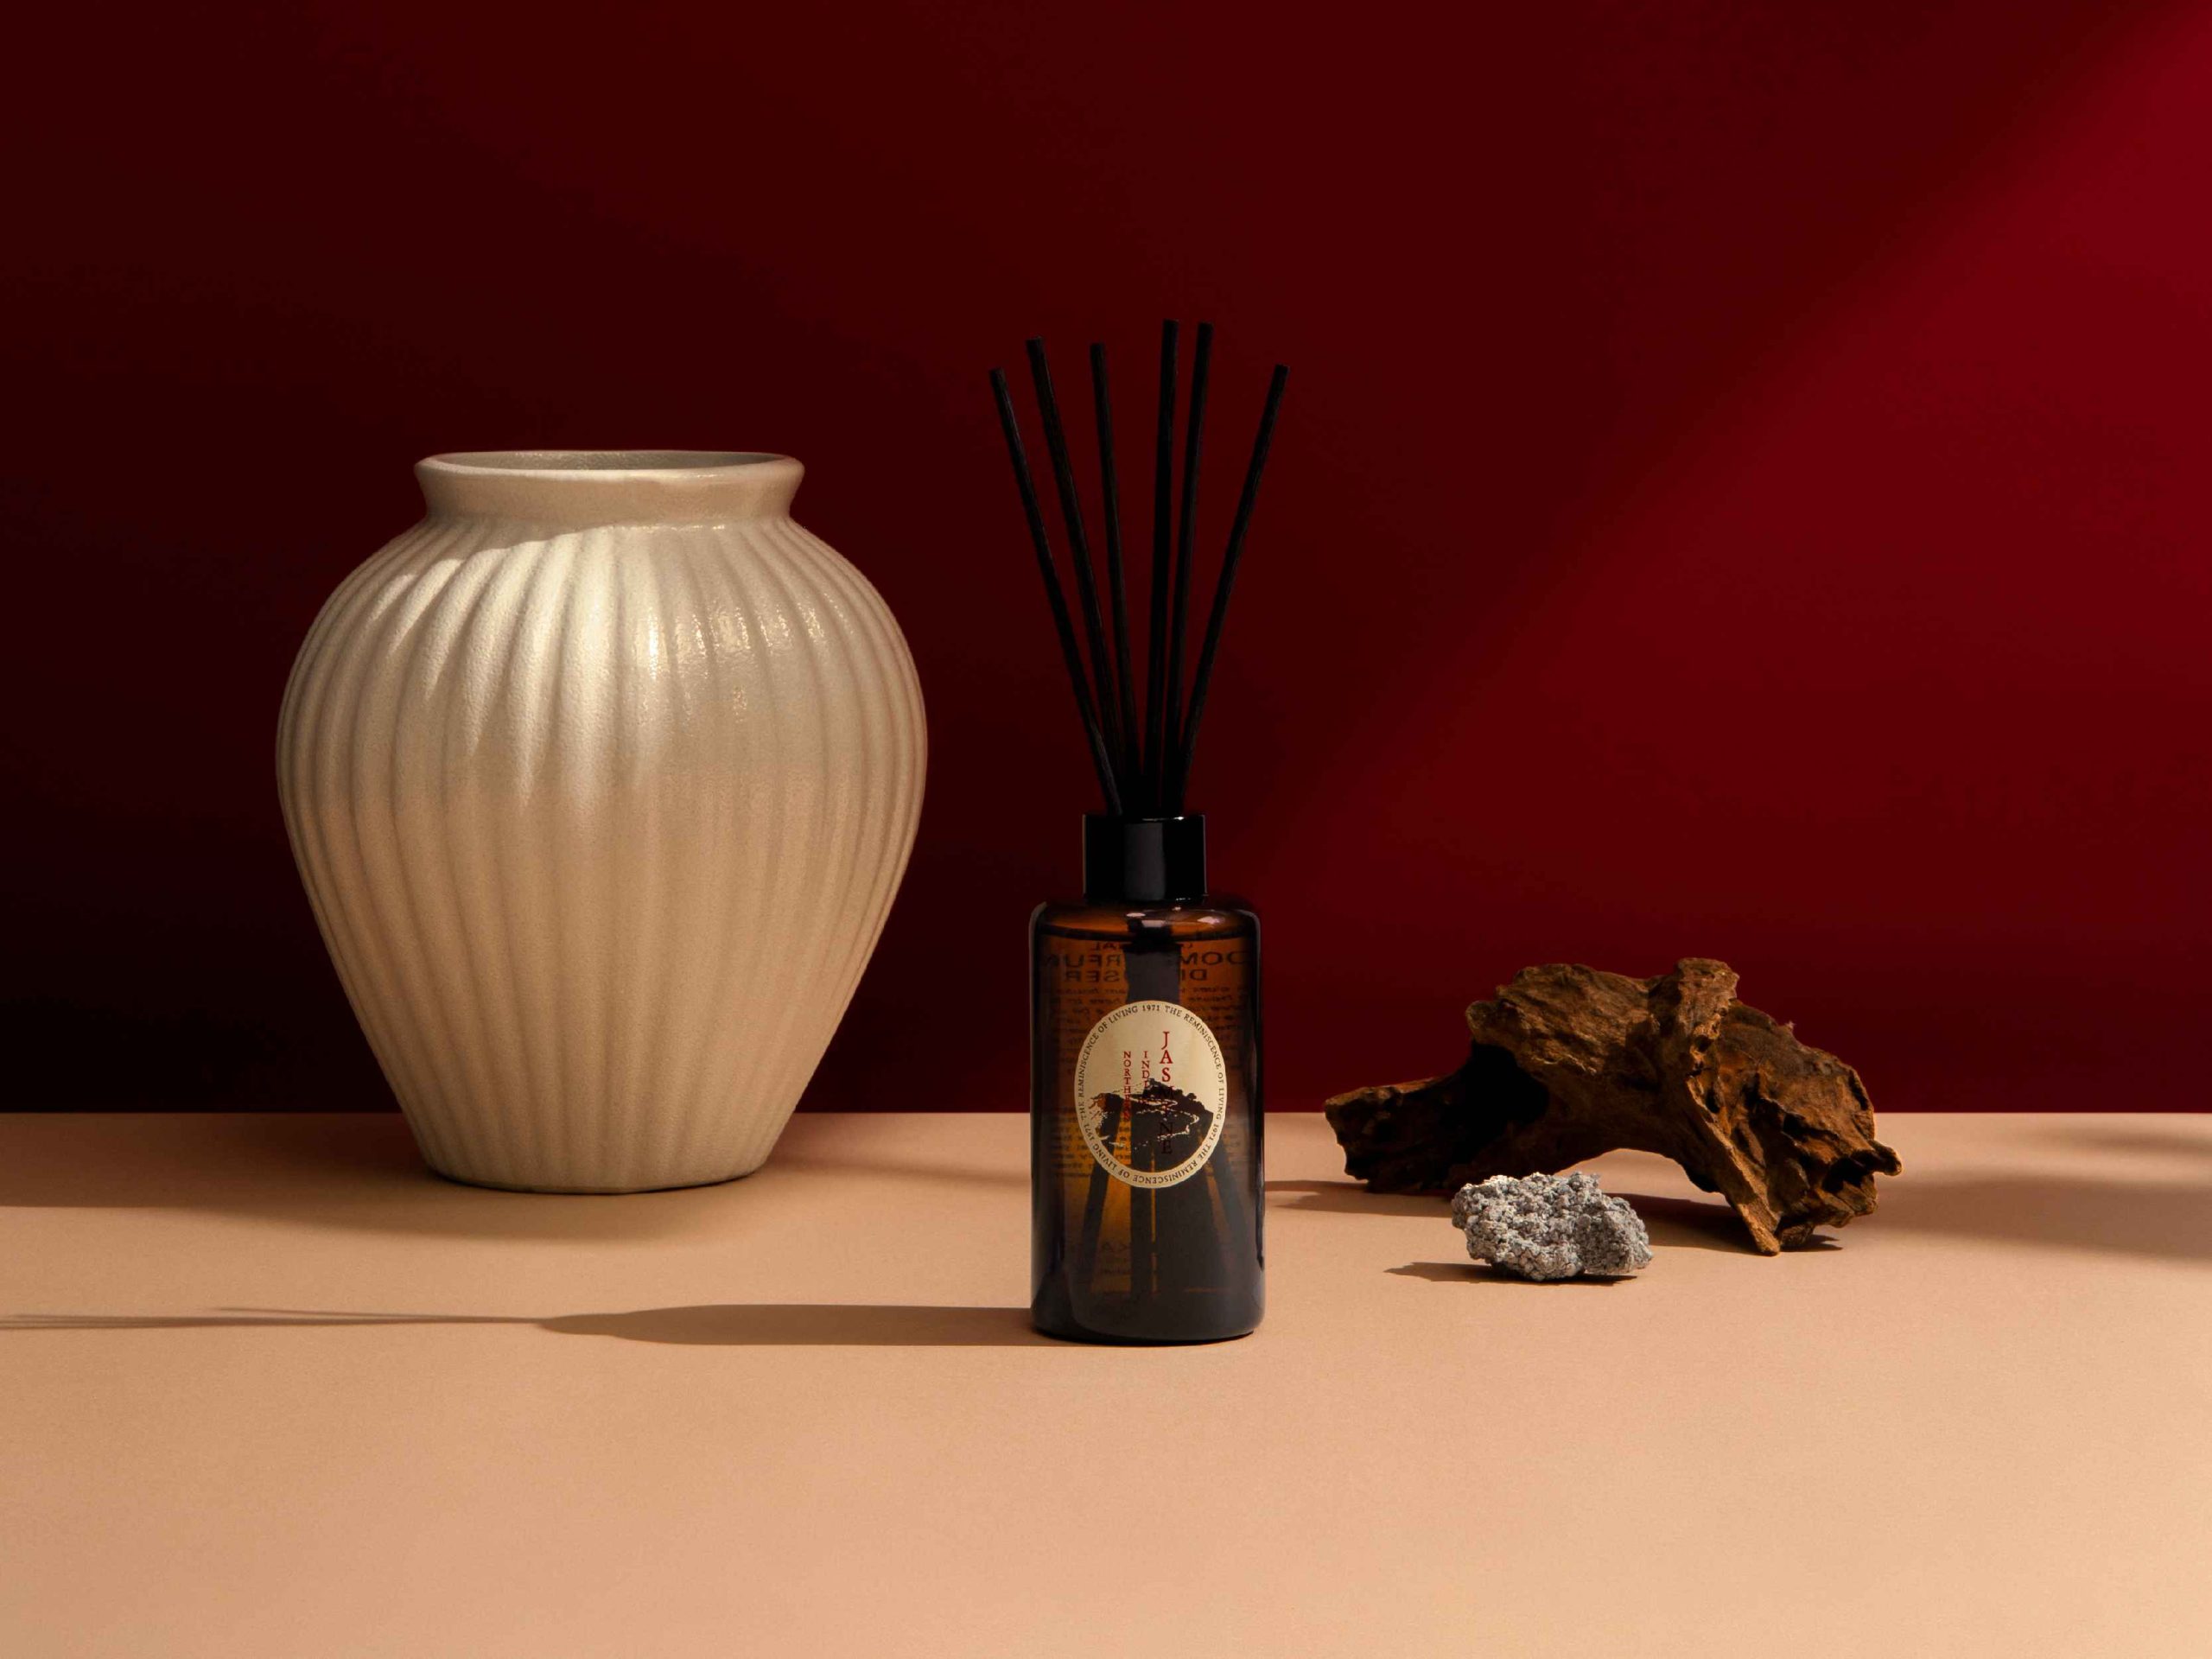 Scent your home with the long lasting aroma of our Original Room Perfume Diffuser.